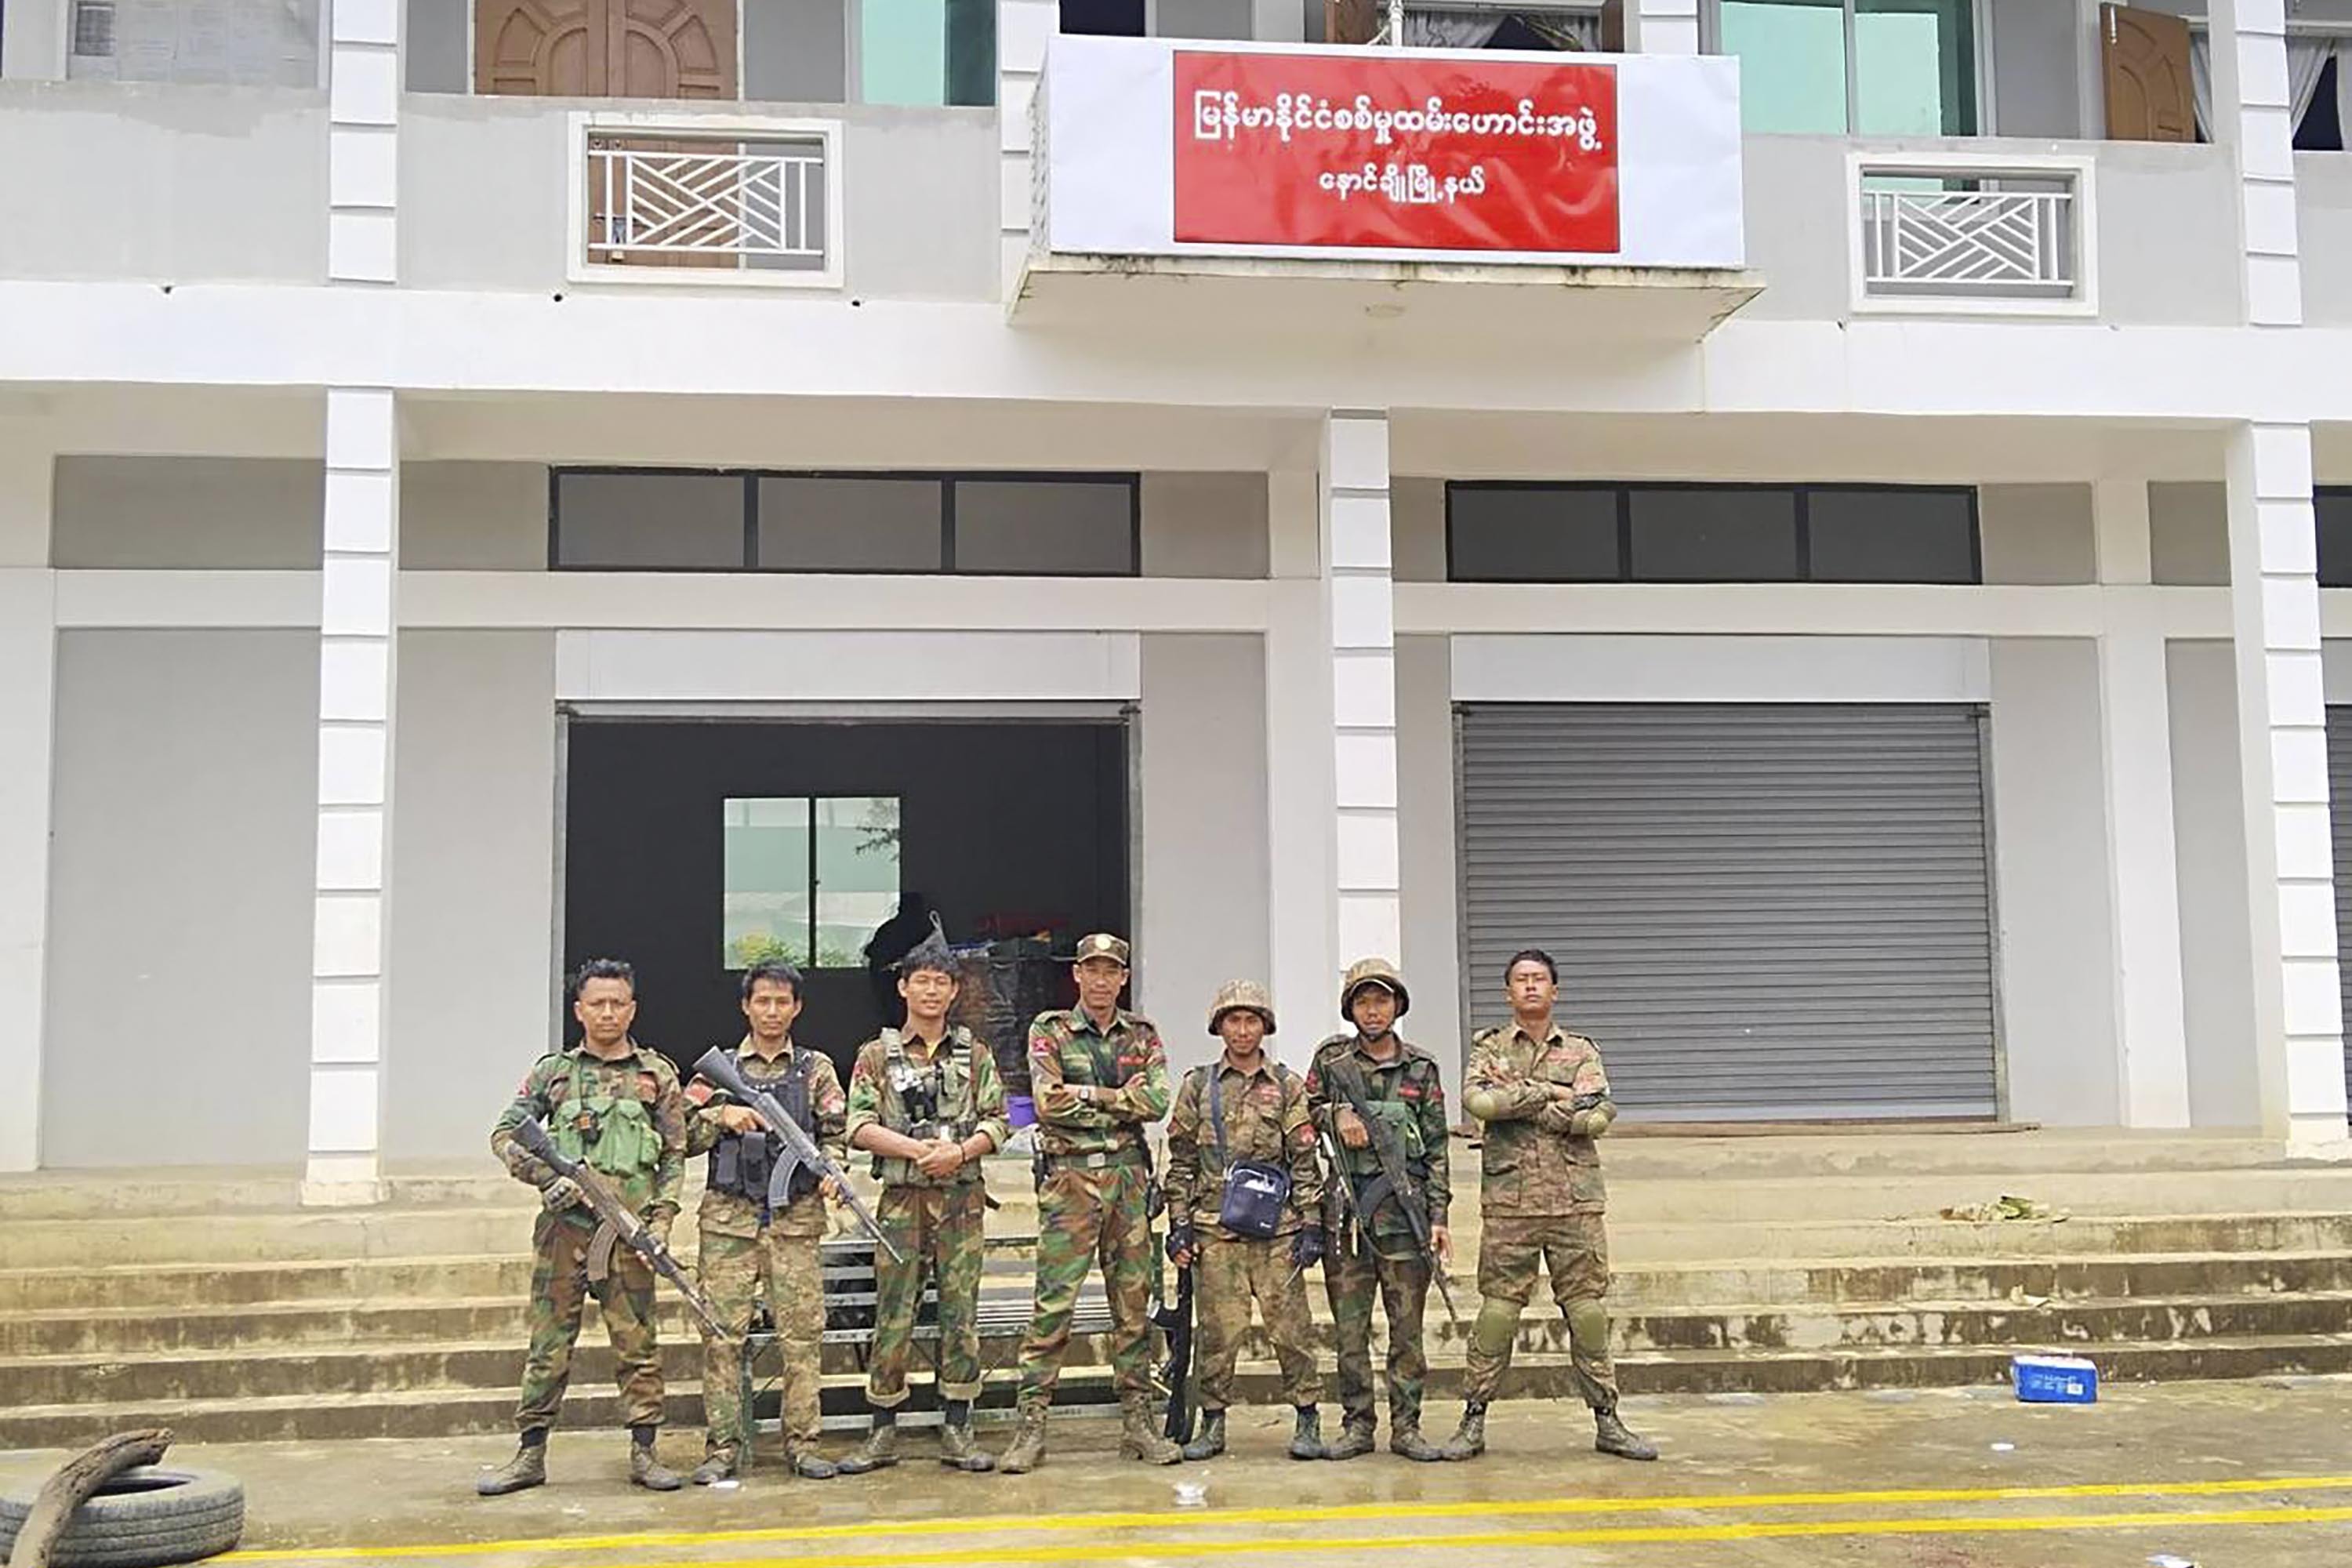 In this handout photo provided by Mandalay People's Defence Force, members of the Ta'ang National Liberation Army, one of the ethnic armed forces in the Brotherhood Alliance, and the Mandalay People's Defence Force pose for a photograph in front of the captured building of the Myanmar War Veterans' Organisation in Nawnghkio township in Shan state, Myanmar, June 26, 2024. New fighting has broken out in northeastern Myanmar, bringing an end to a Chinese-brokered cease-fire and putting pressure on the military regime as it faces attacks from resistance forces on multiple fronts in the country's civil war. (Mandalay People's Defence Force via AP)